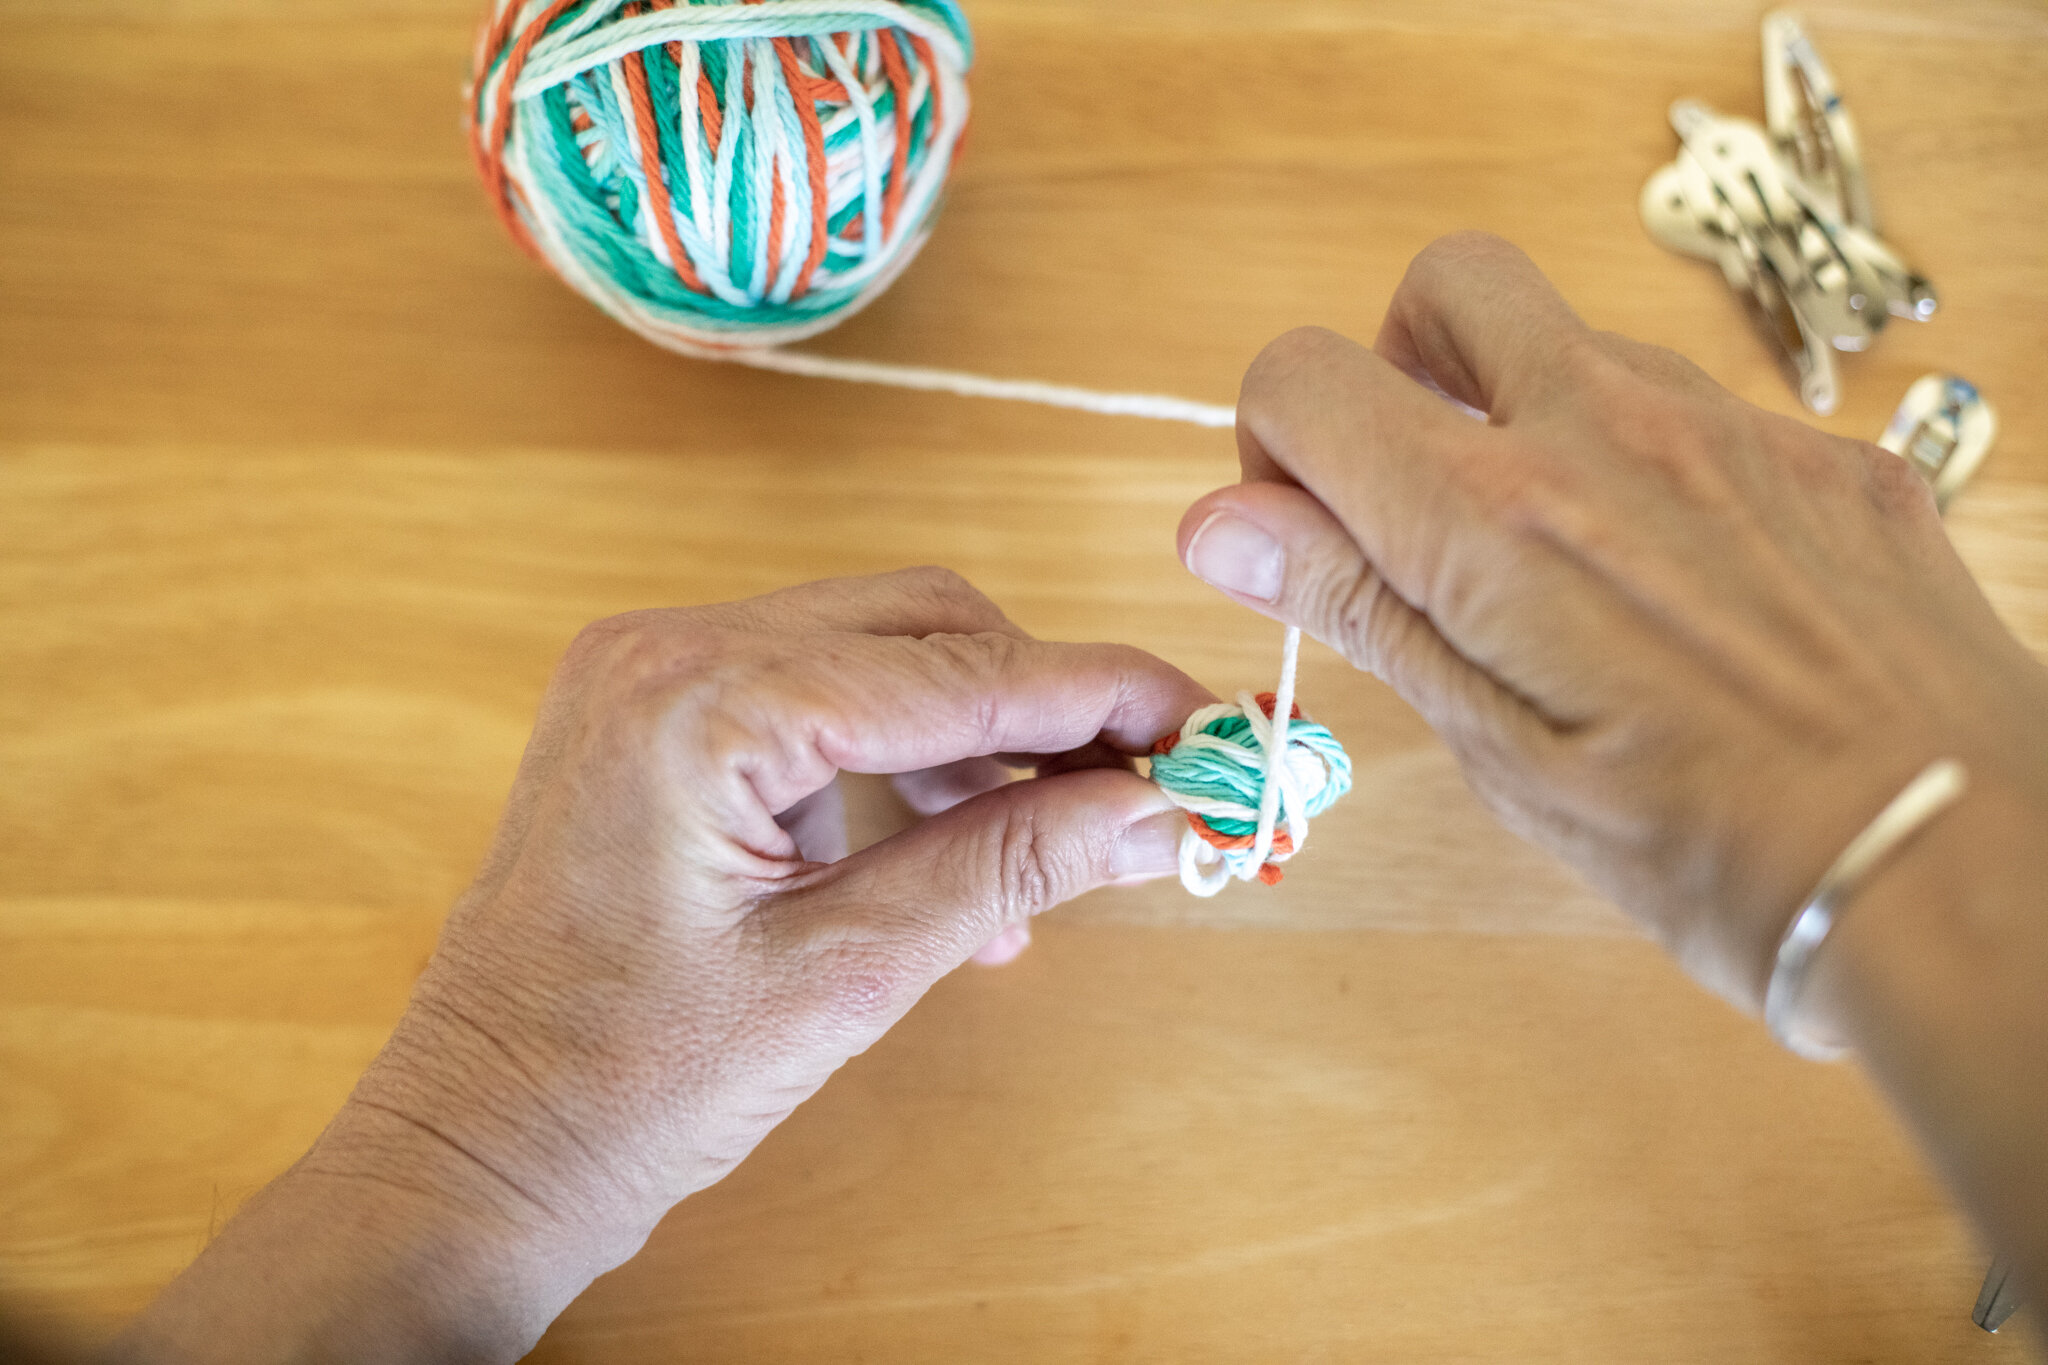  Pick up the ball and wrap the yarn in the opposite direction of what you just rolled. It may still look lopsided and uneven. It can all be sorted out as you add more yarn. 